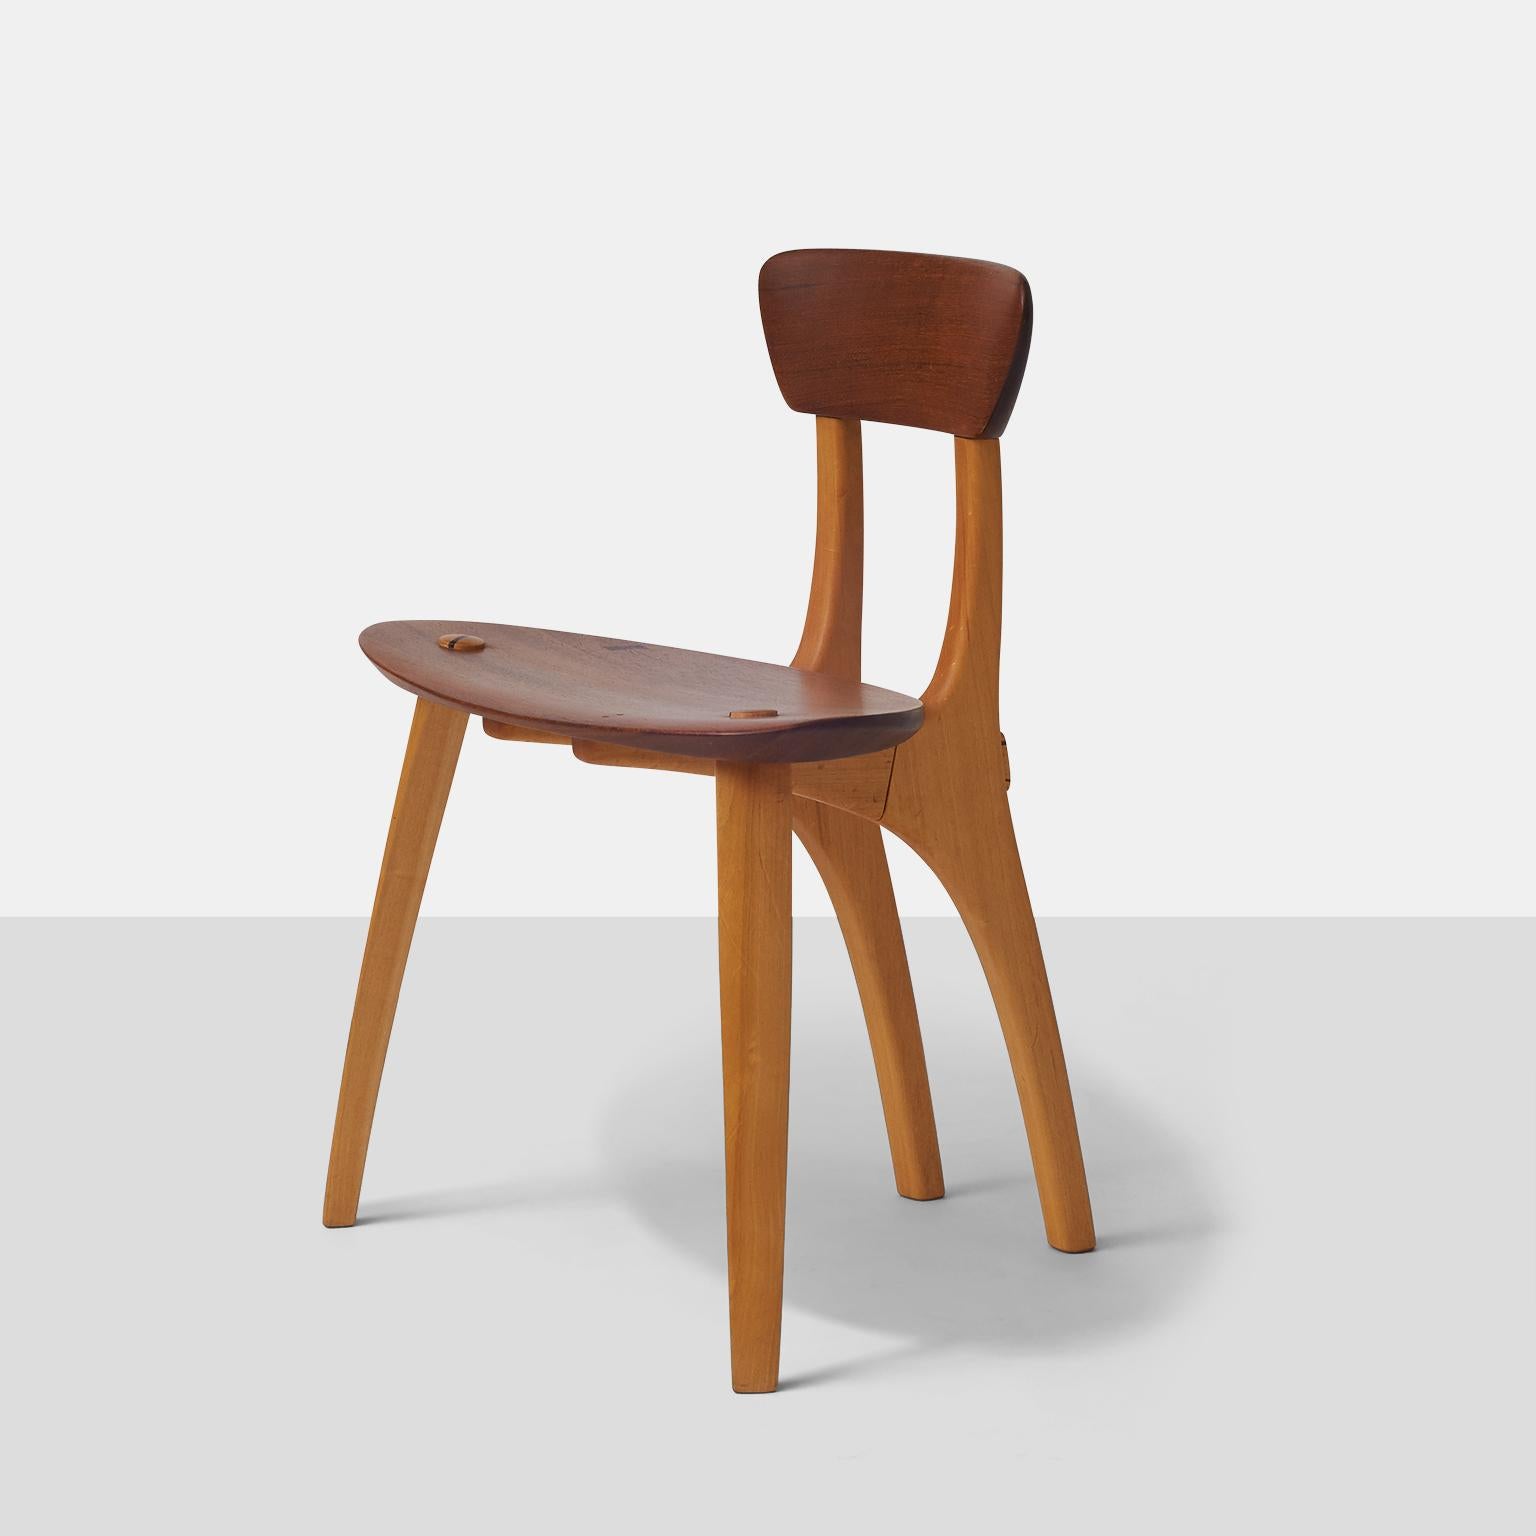 A unique side chair of two different Brazilian hardwoods, by Morito. The curved back and angle of the seat make this a very comfortable chair.